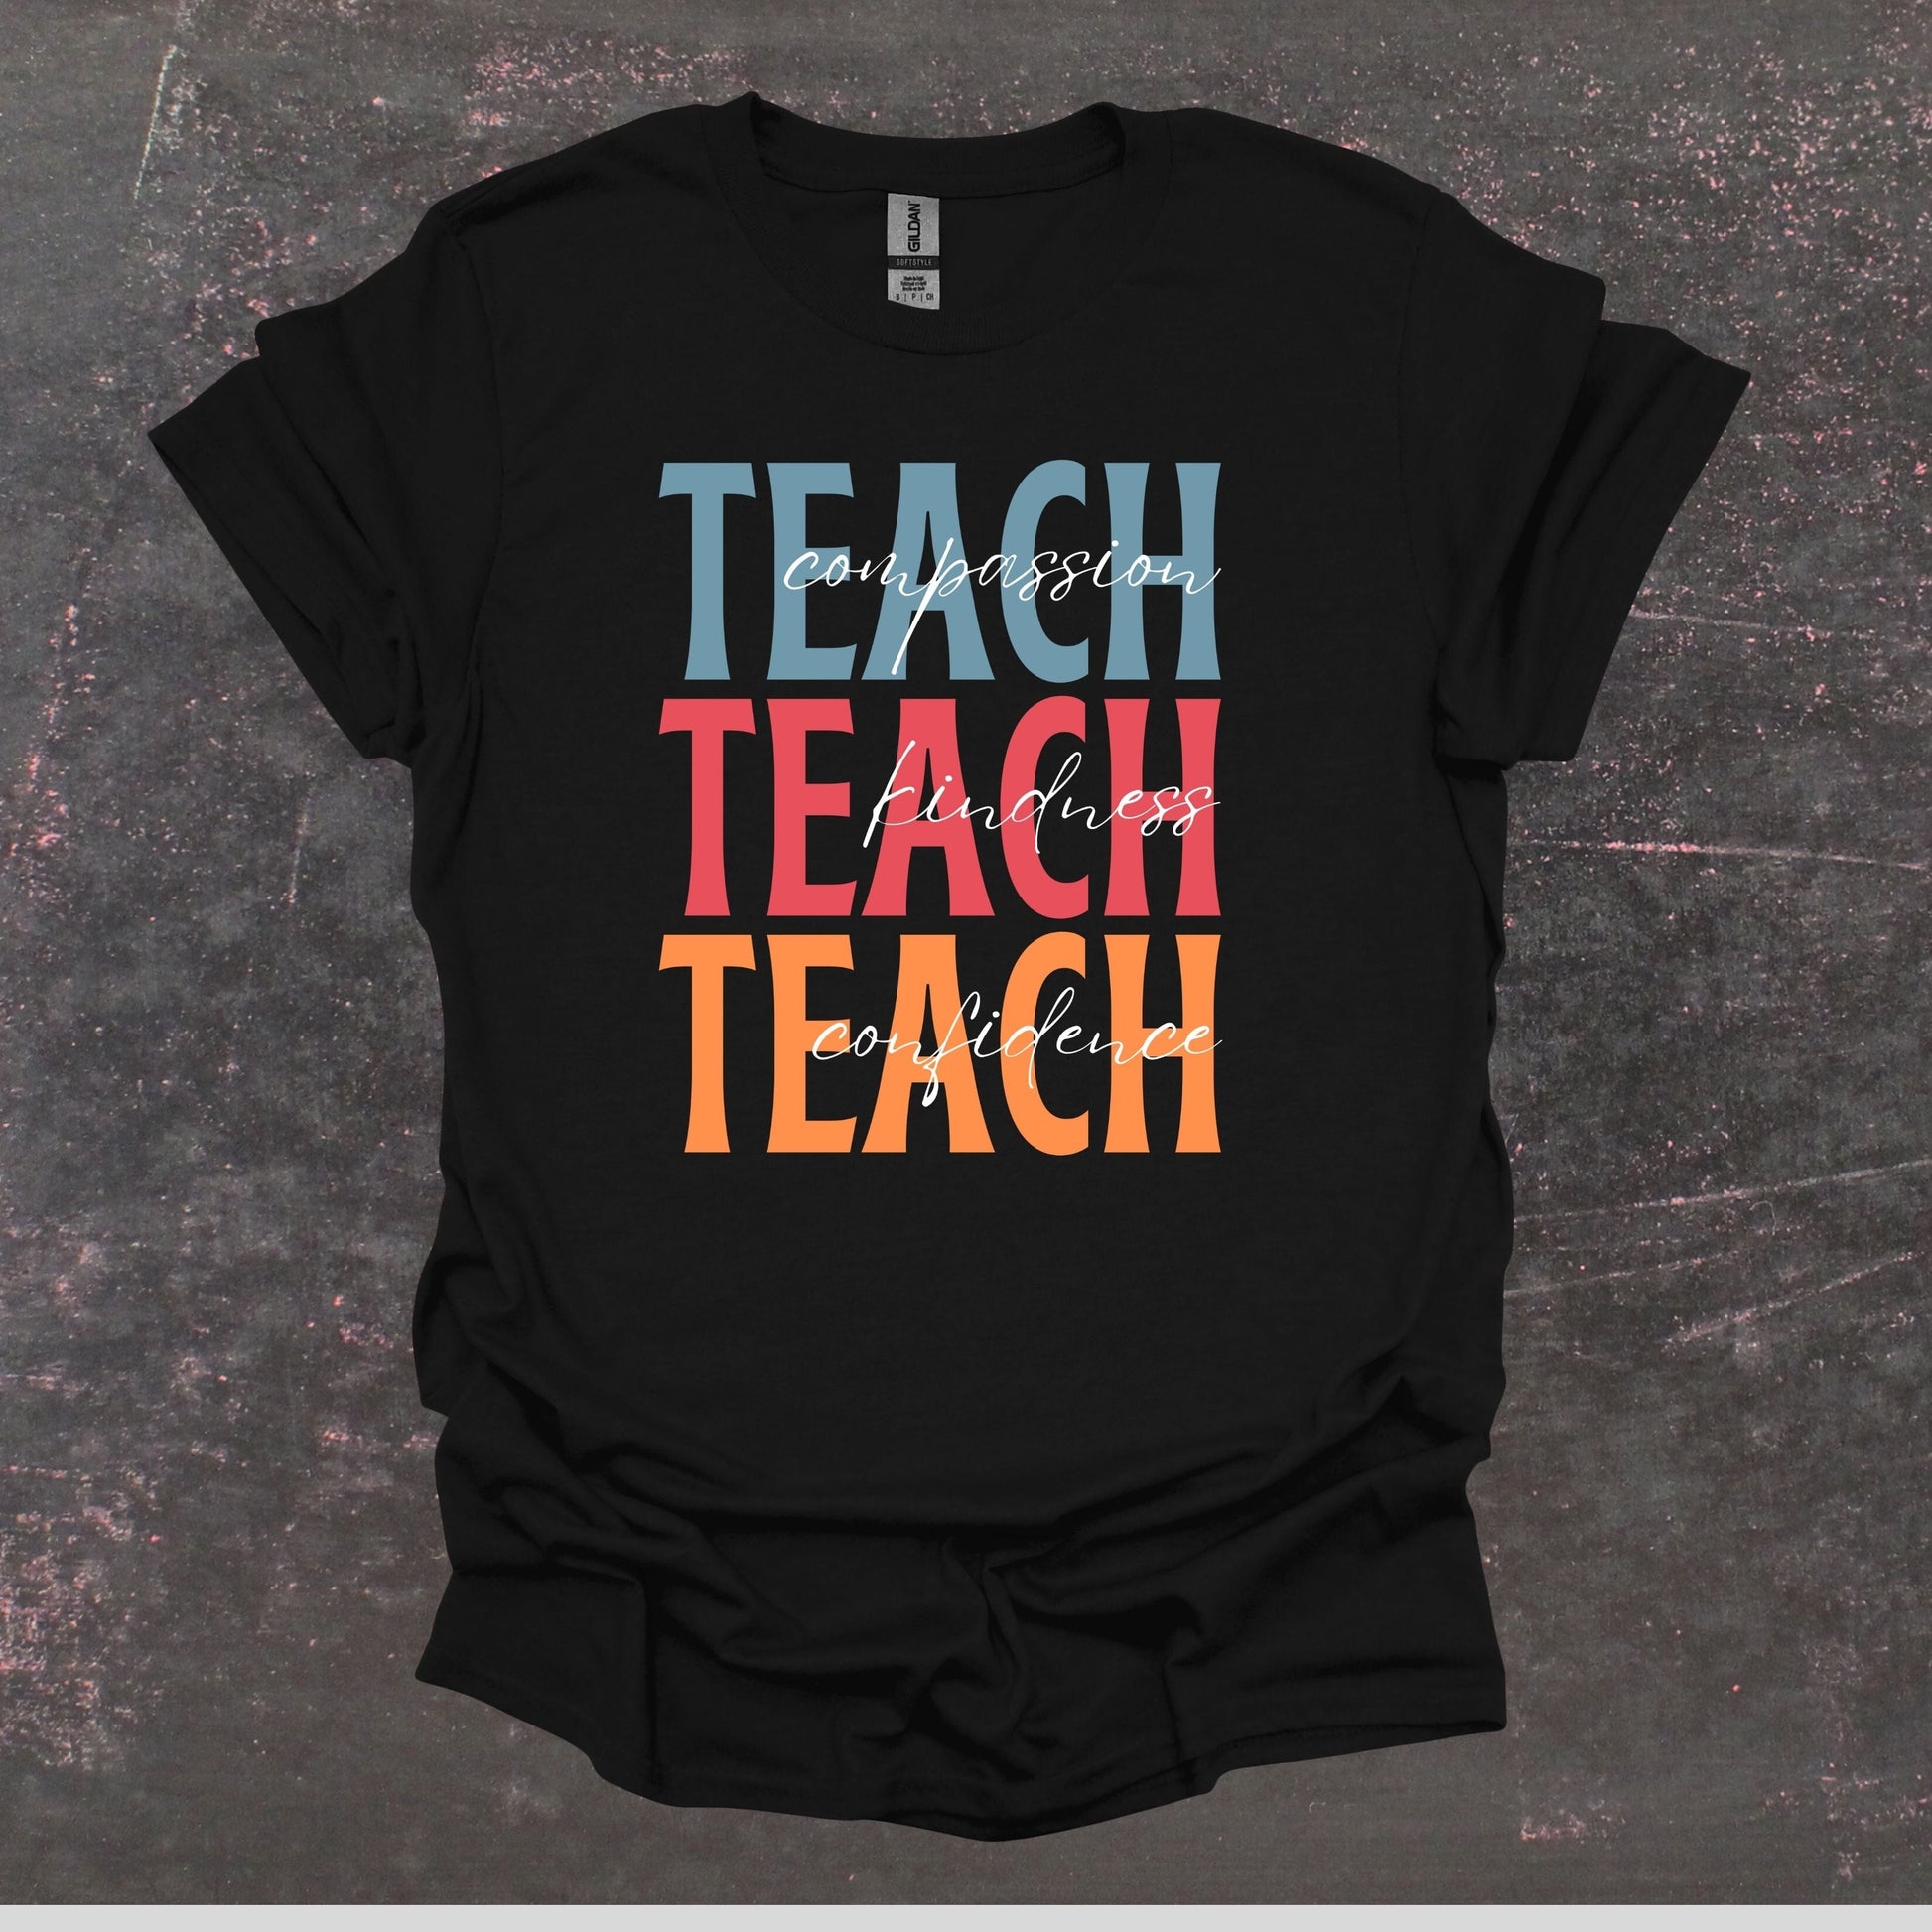 Teach Compassion Kindness Confidence - Teacher T Shirt - Adult Tee Shirts T-Shirts Graphic Avenue Black Adult Small 